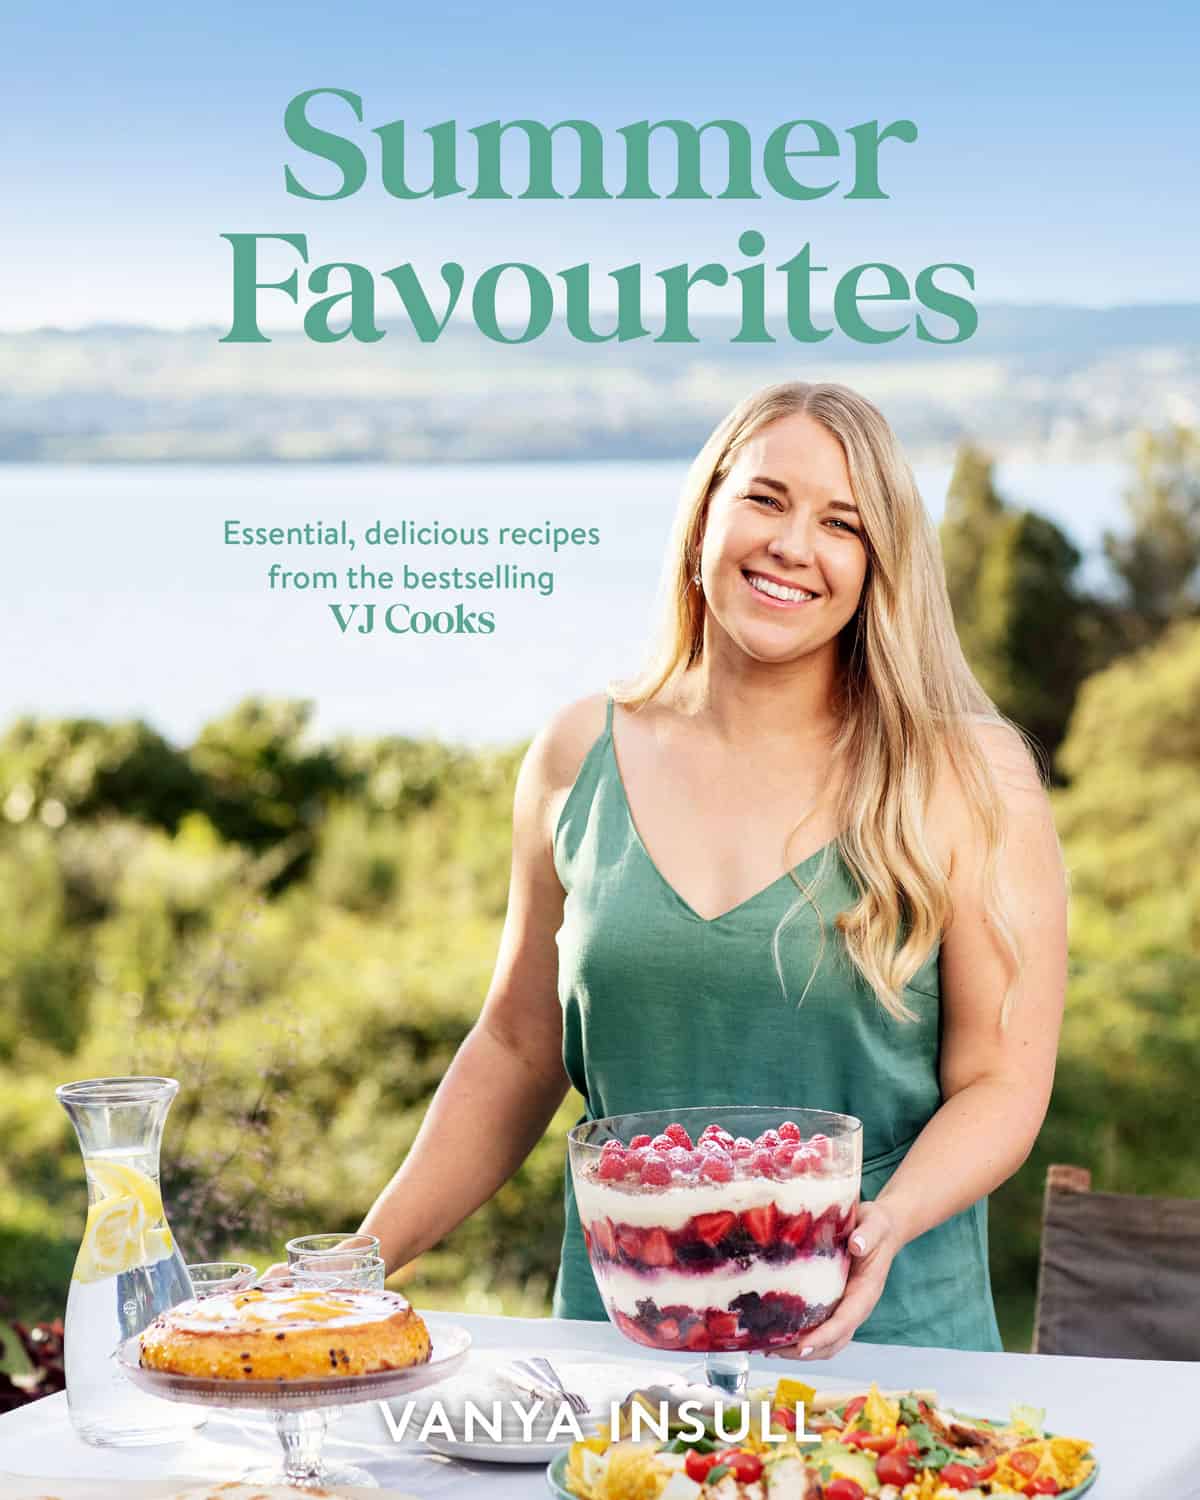 Summer Favourites Cookbook cover 